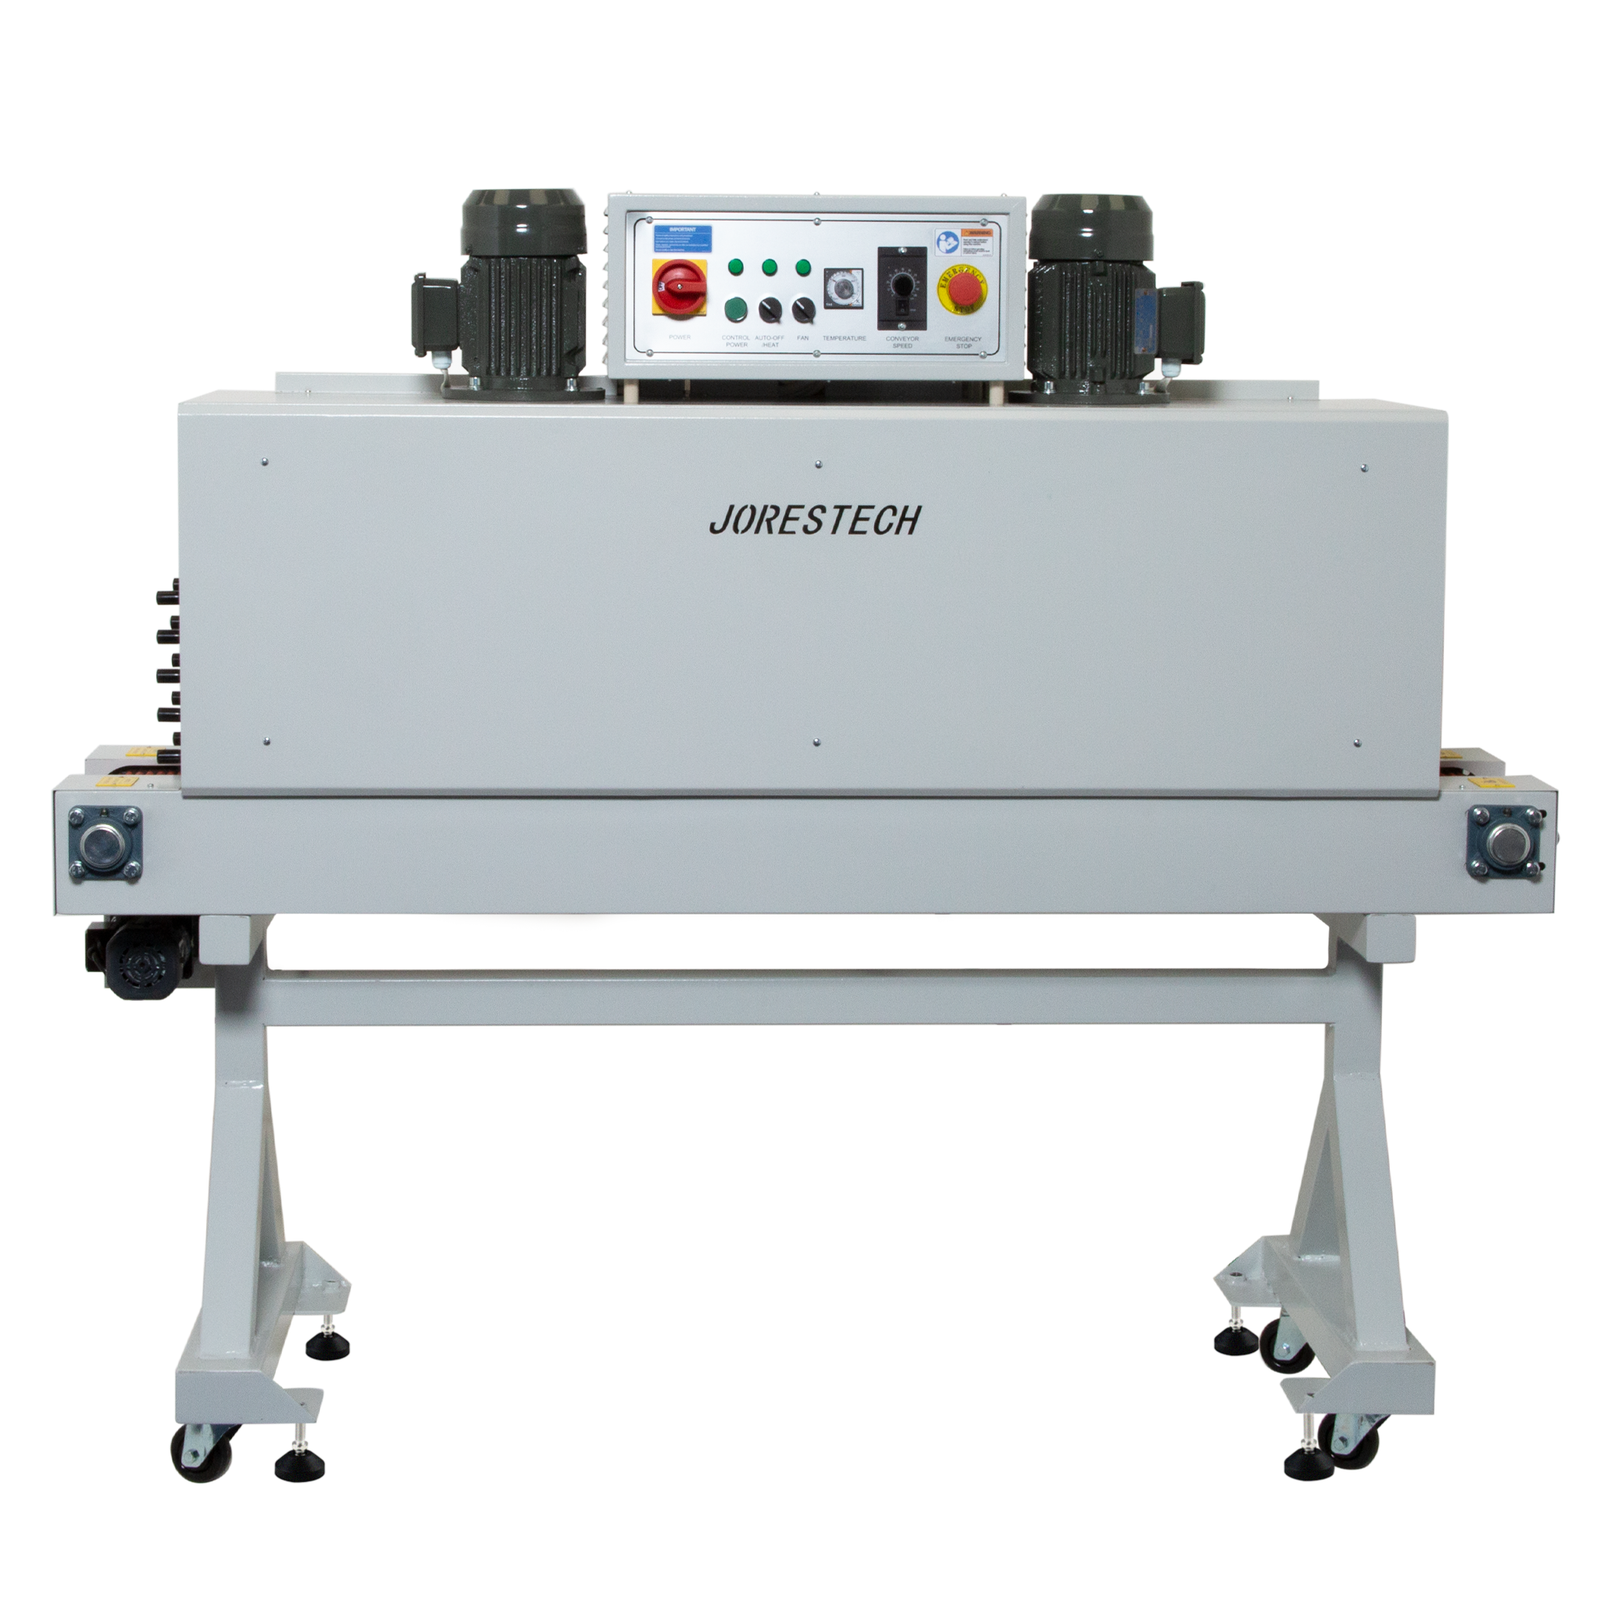 JORESTECH Full bottle heat sleeve wrapping tunnel machine shown in a frontal view over white background. 